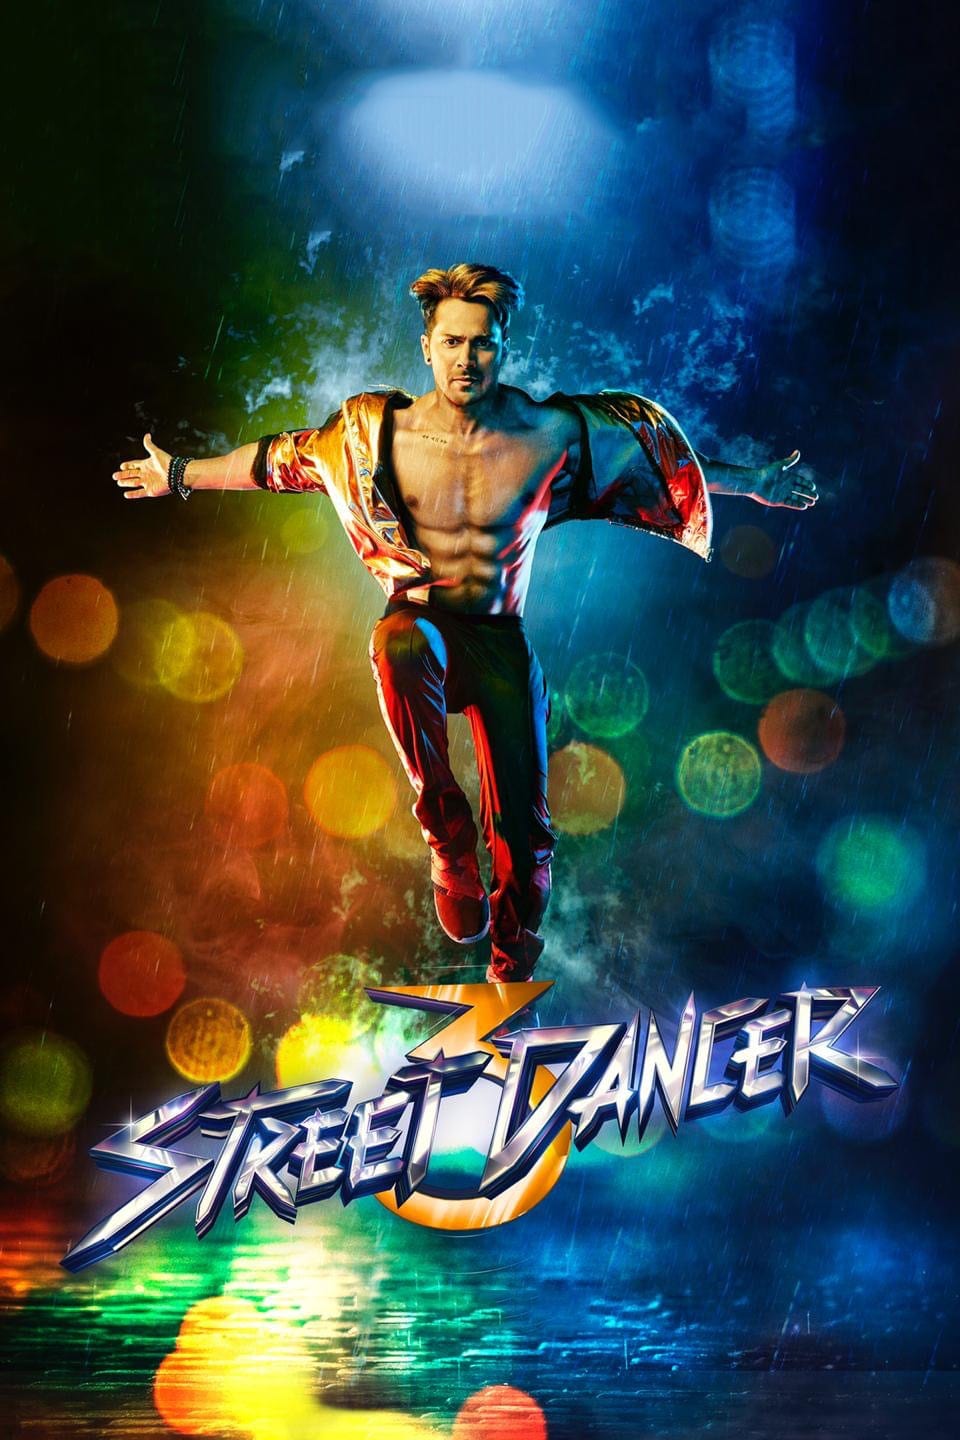 Poster for the movie "Street Dancer 3D"